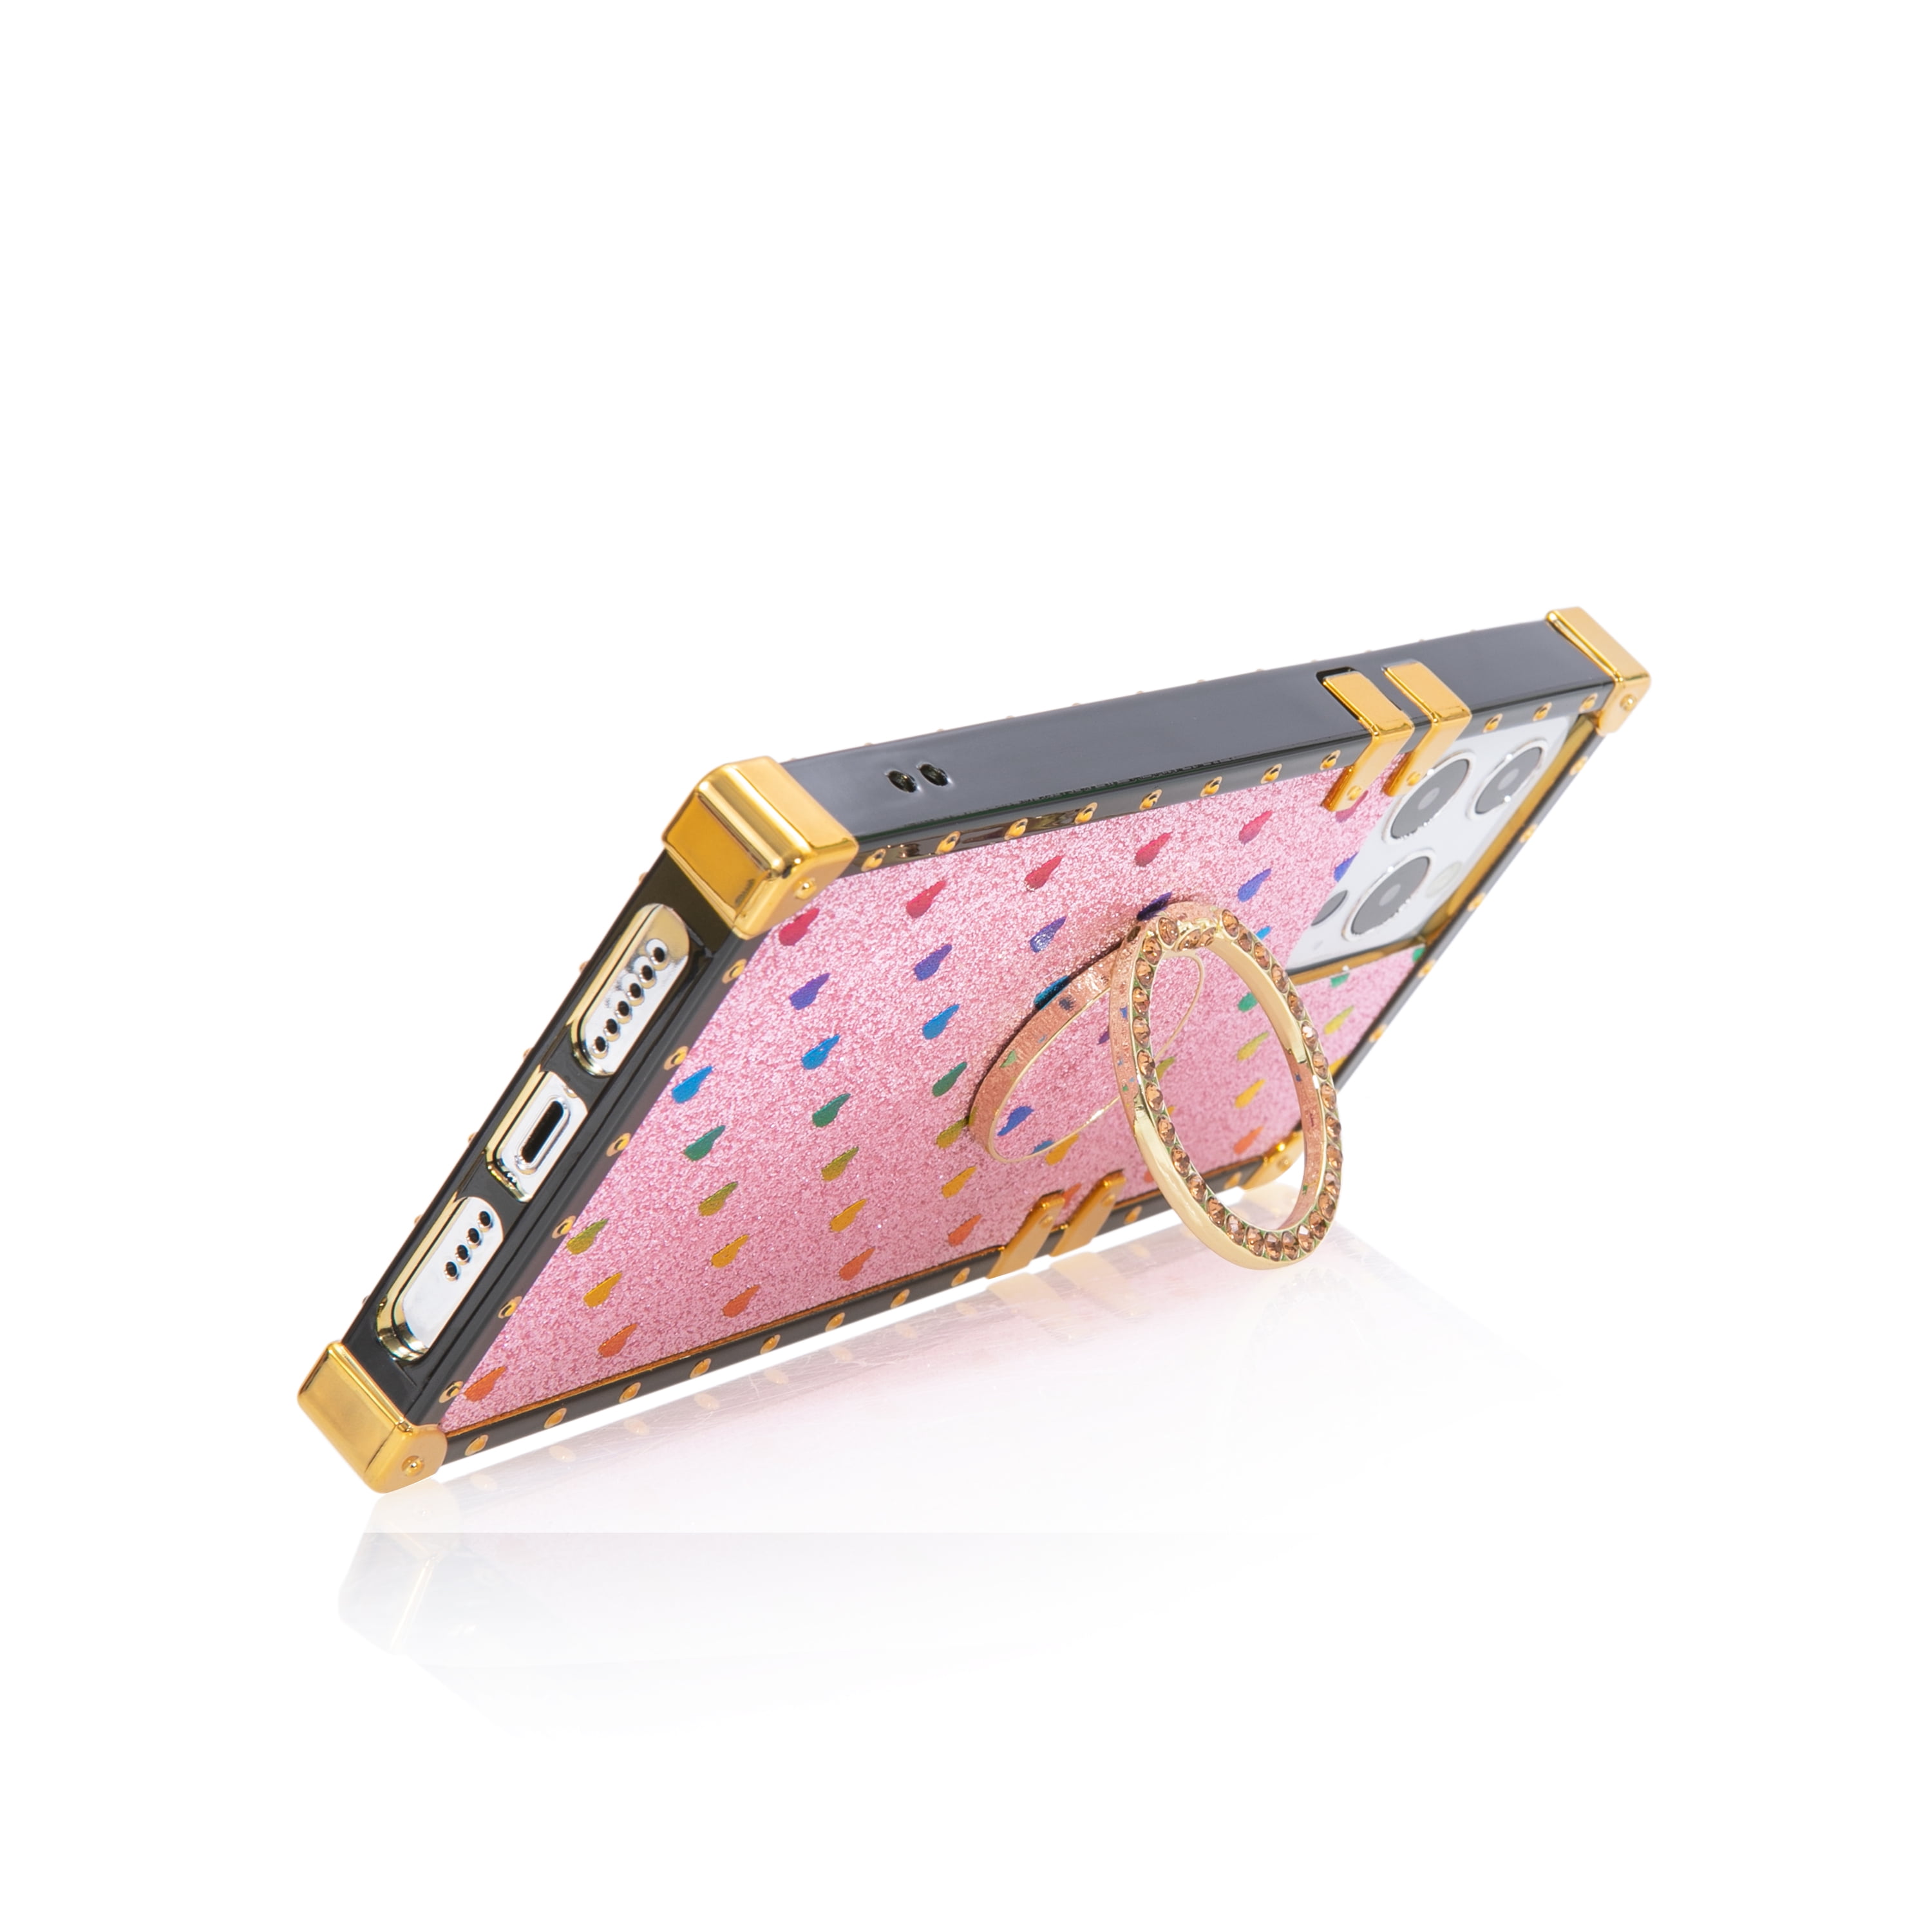 square louis vuitton phone case with handle for s10 galaxy